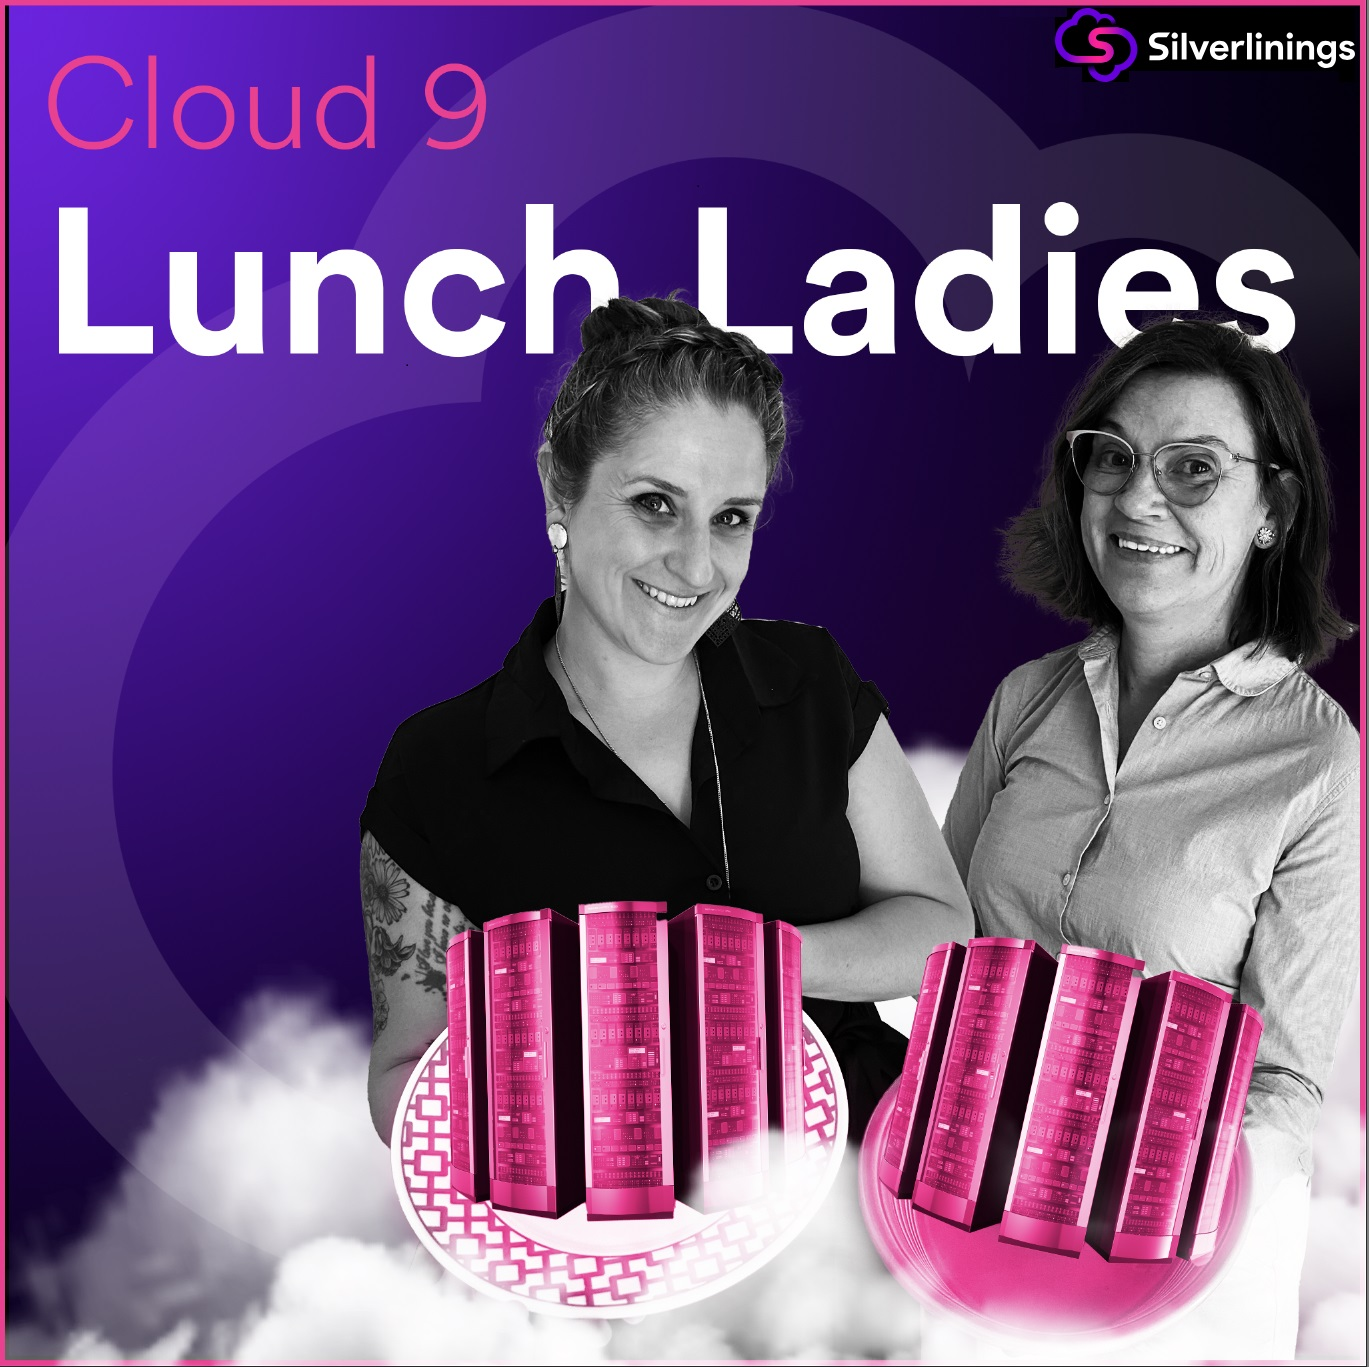 Lunch Ladies News Wrap - Nokia's job cuts, Ericsson, AWS, data centers and a new puppy!